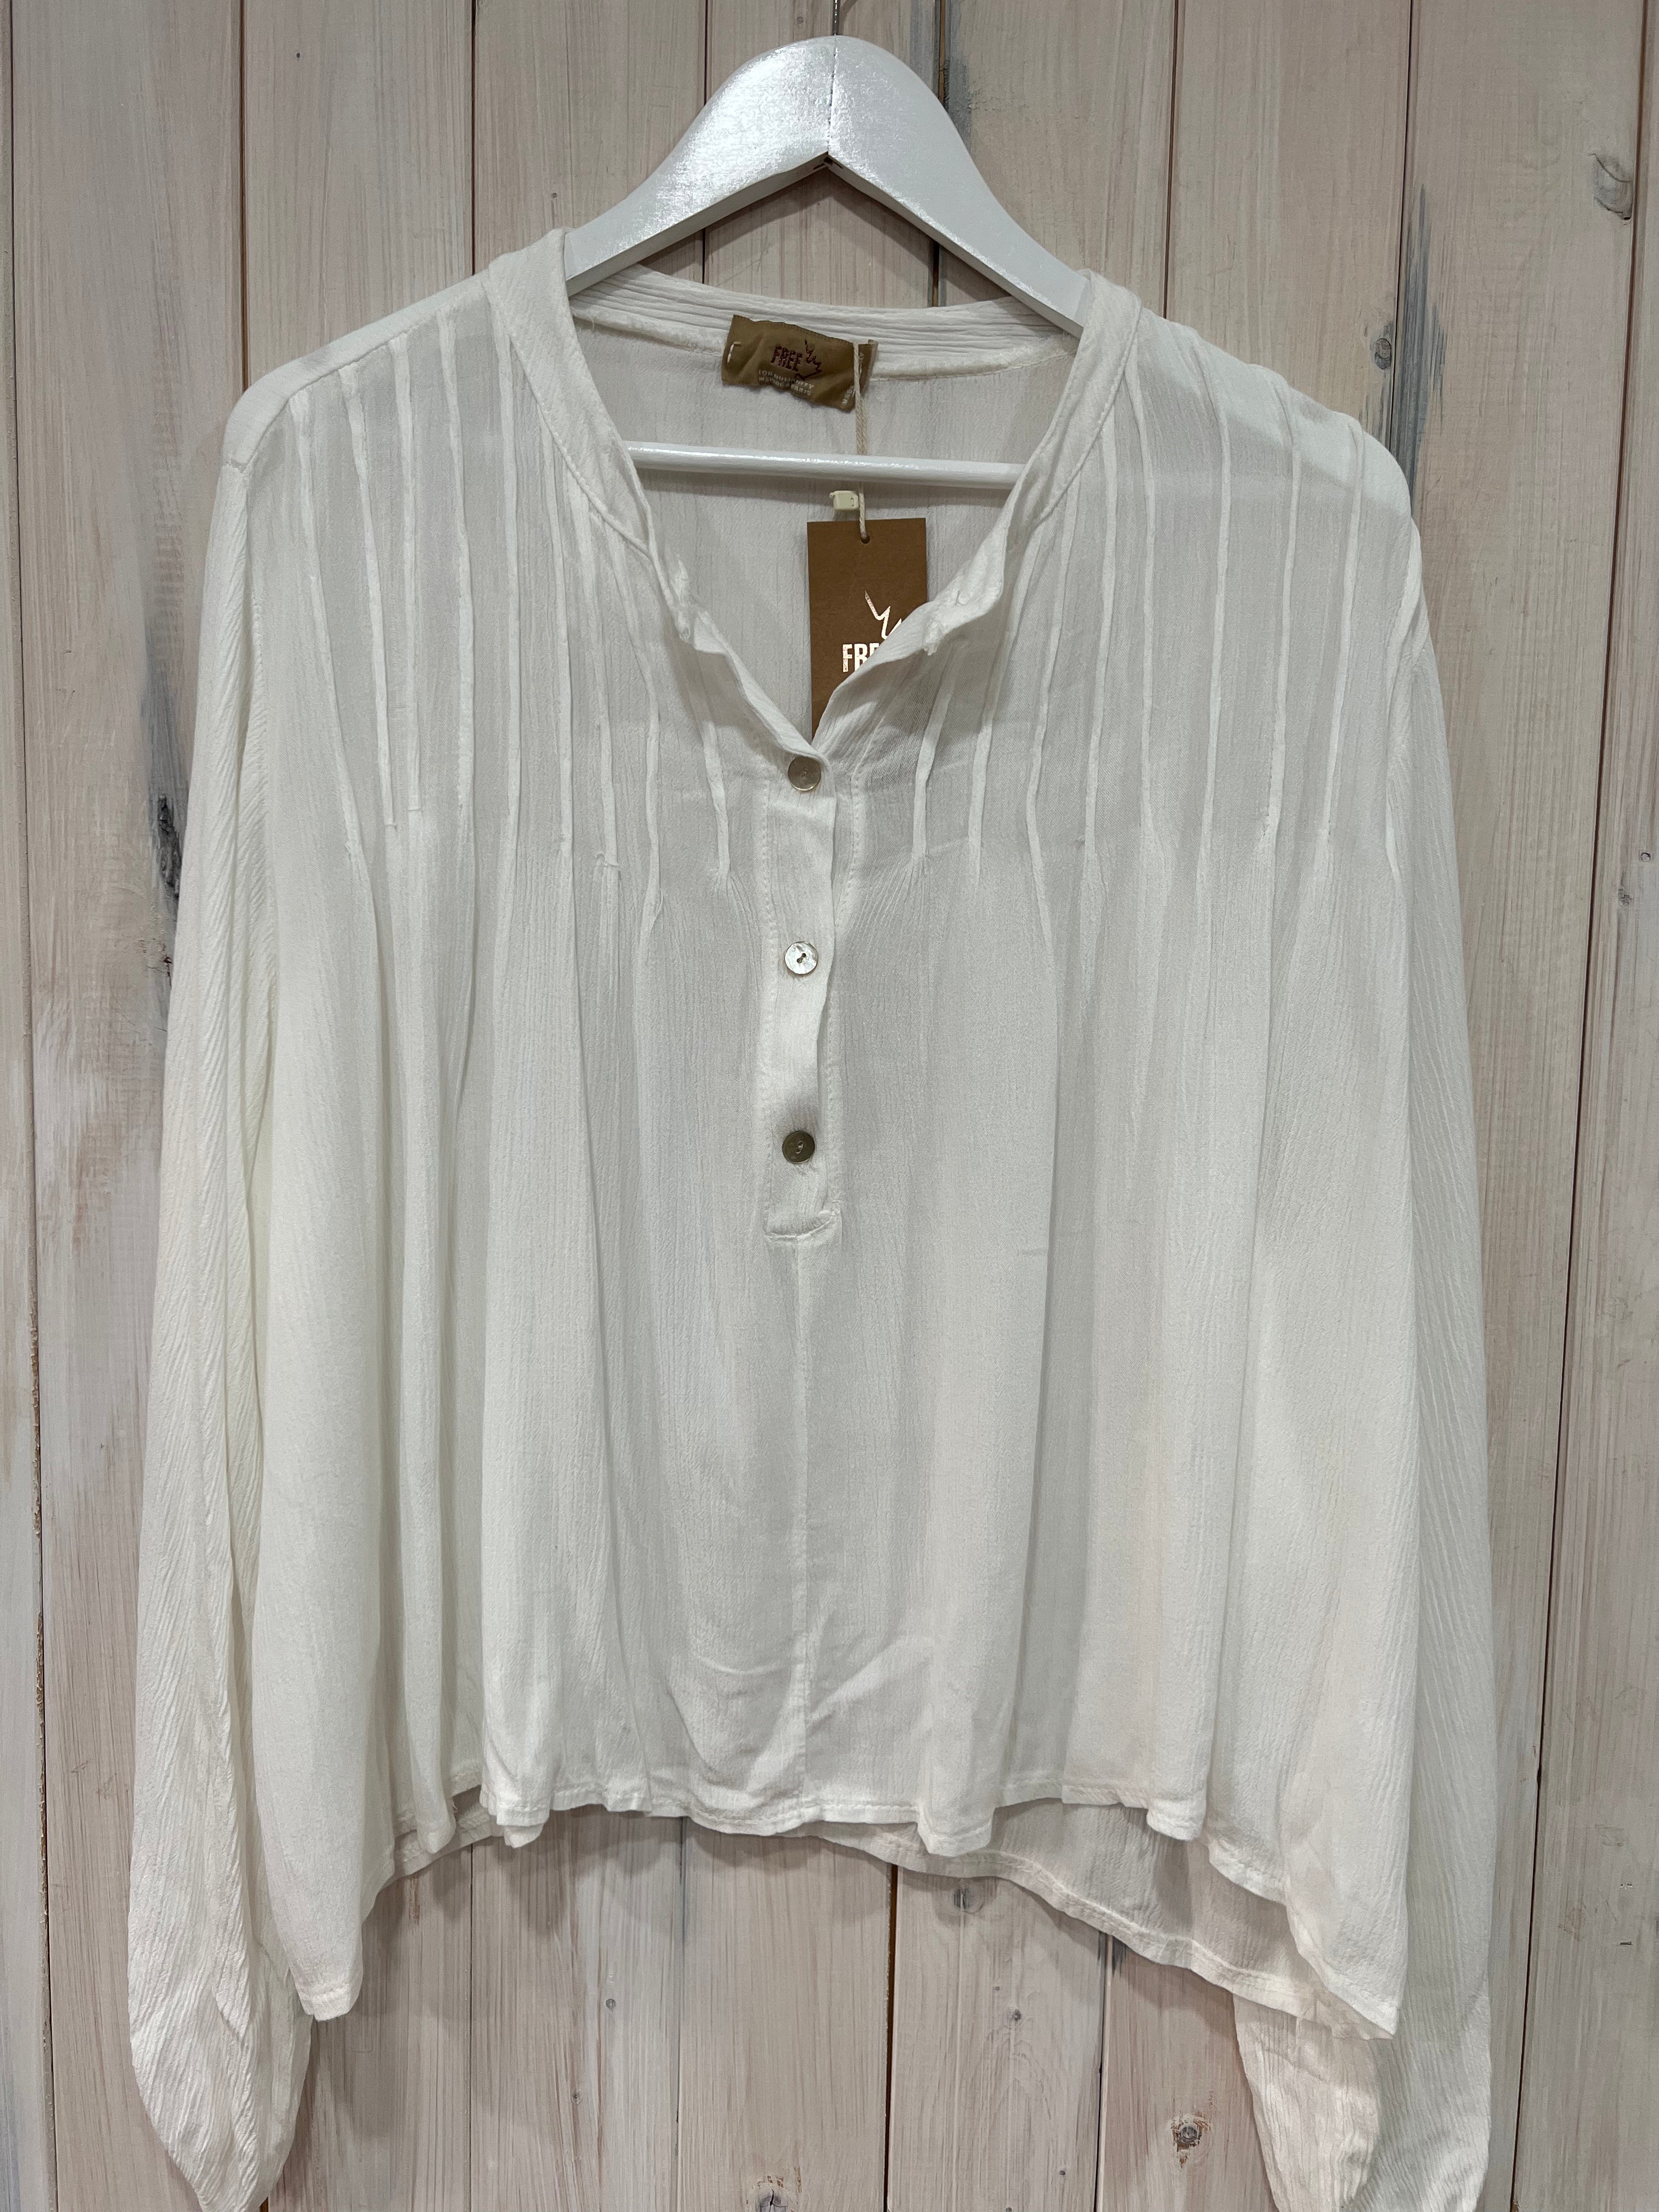 Sussette Blouse - New Brand